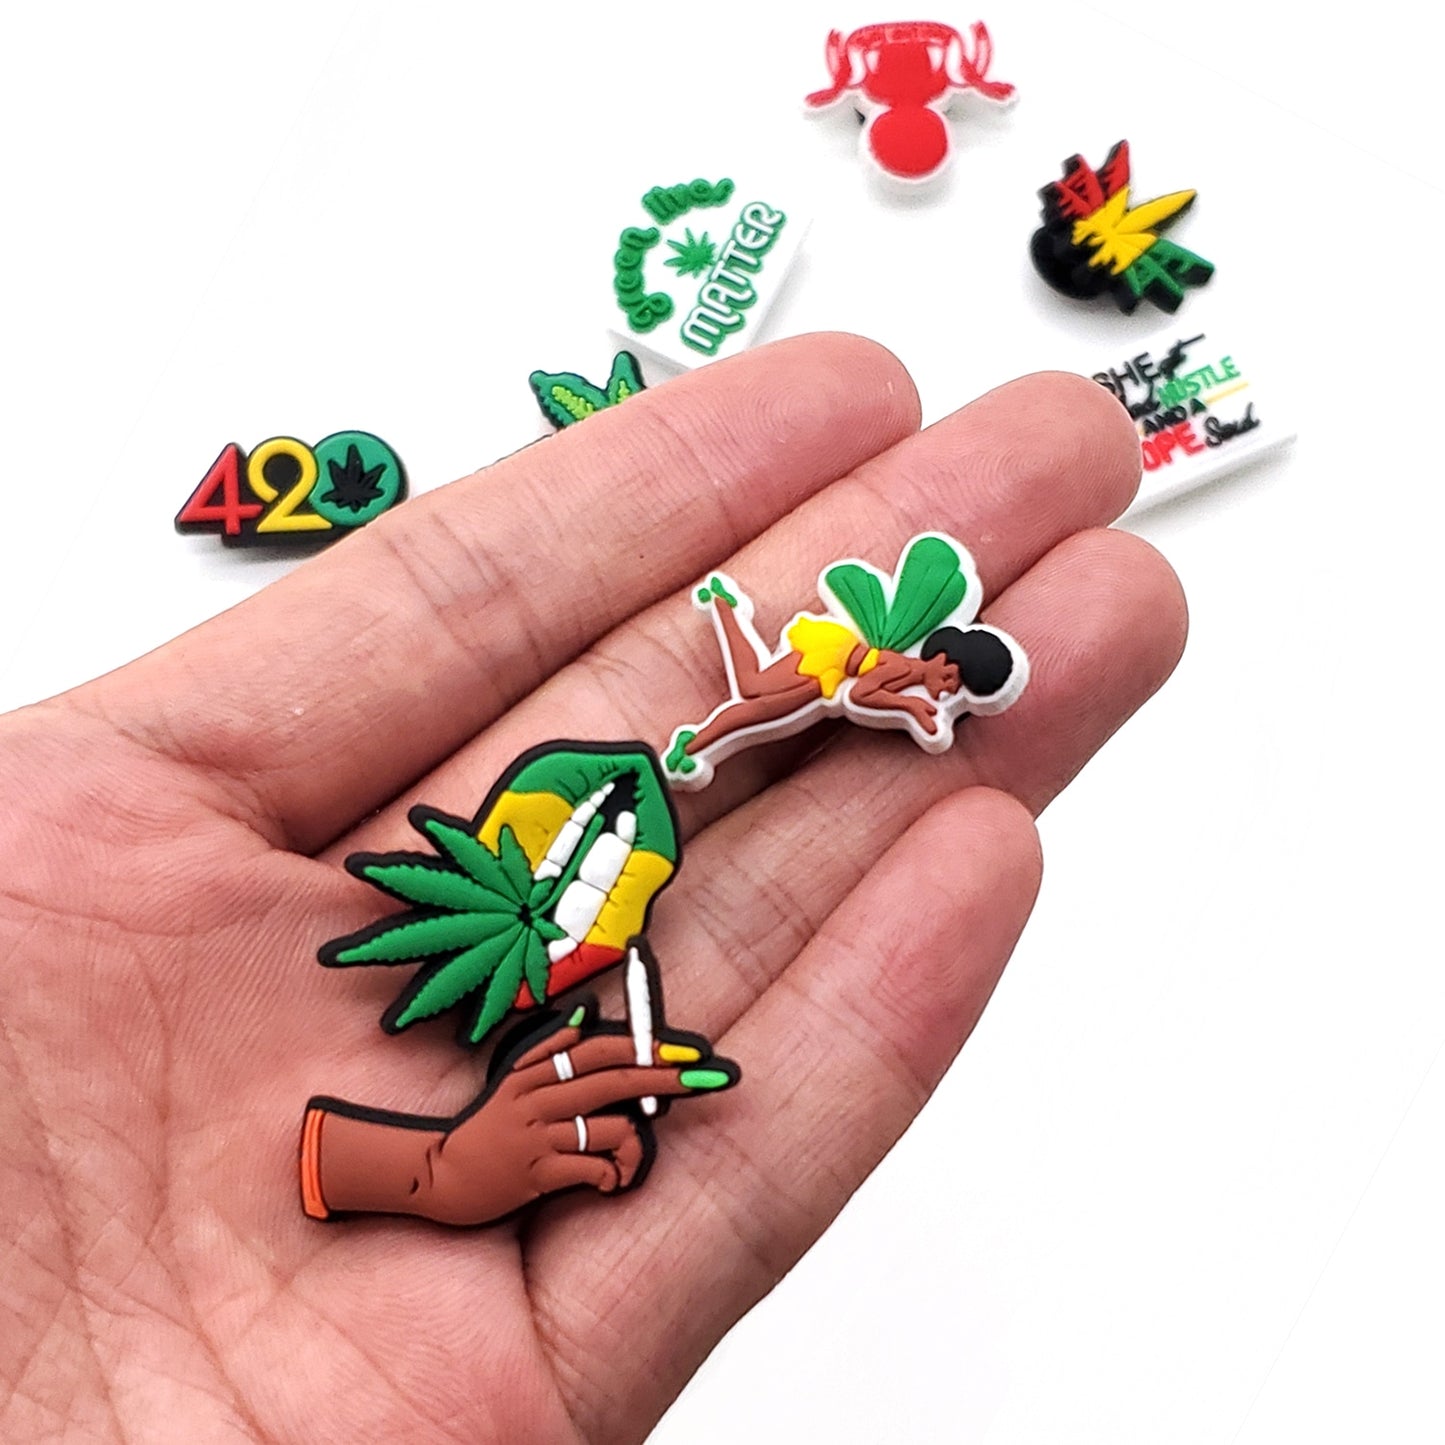 Hot 1pcs green leaf PVC Shoe Charms Funny DIY Weed Shoe Aceessories Fit croc Sandals Decorations Unisex adult X-mas Gifts jibz Hot 1pcs green leaf PVC Shoe Charms Funny DIY Weed Shoe Aceessories Fit croc Sandals Decorations Unisex adult X-mas Gifts jibz Foreverking